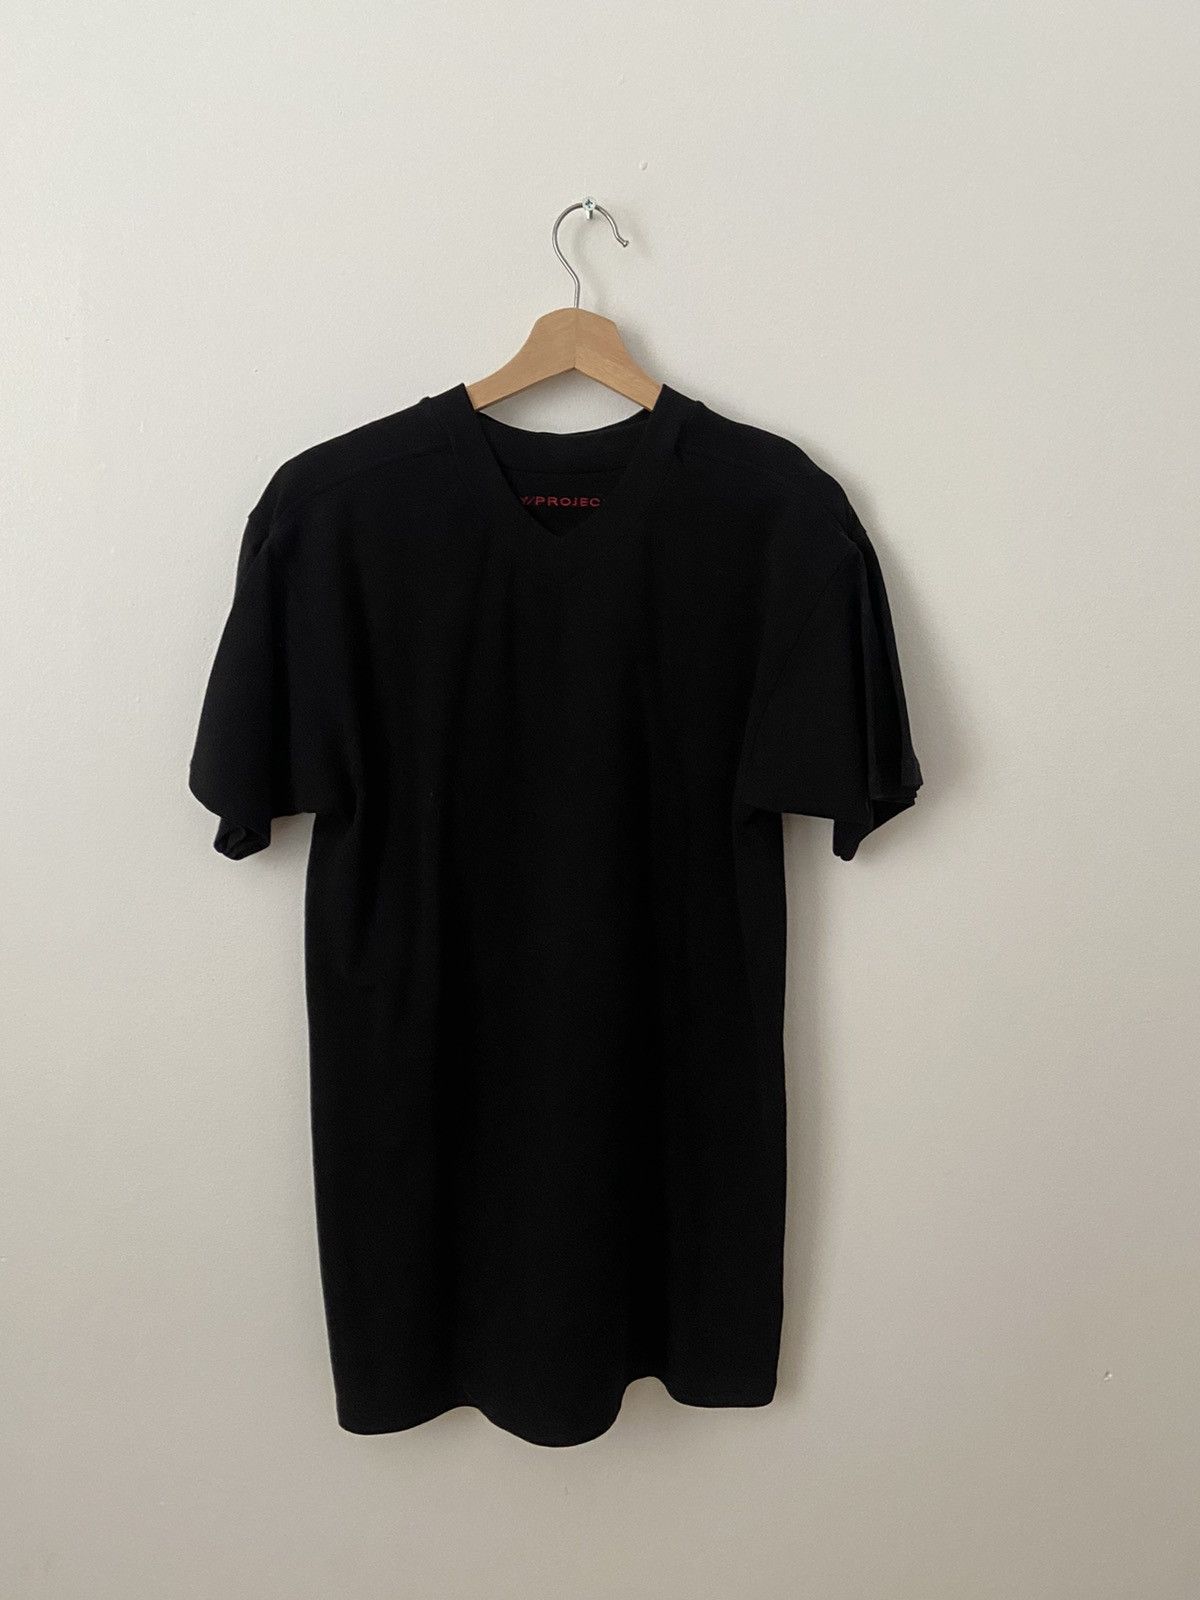 Y/Project Double sleeve t shirt Size US M / EU 48-50 / 2 - 1 Preview